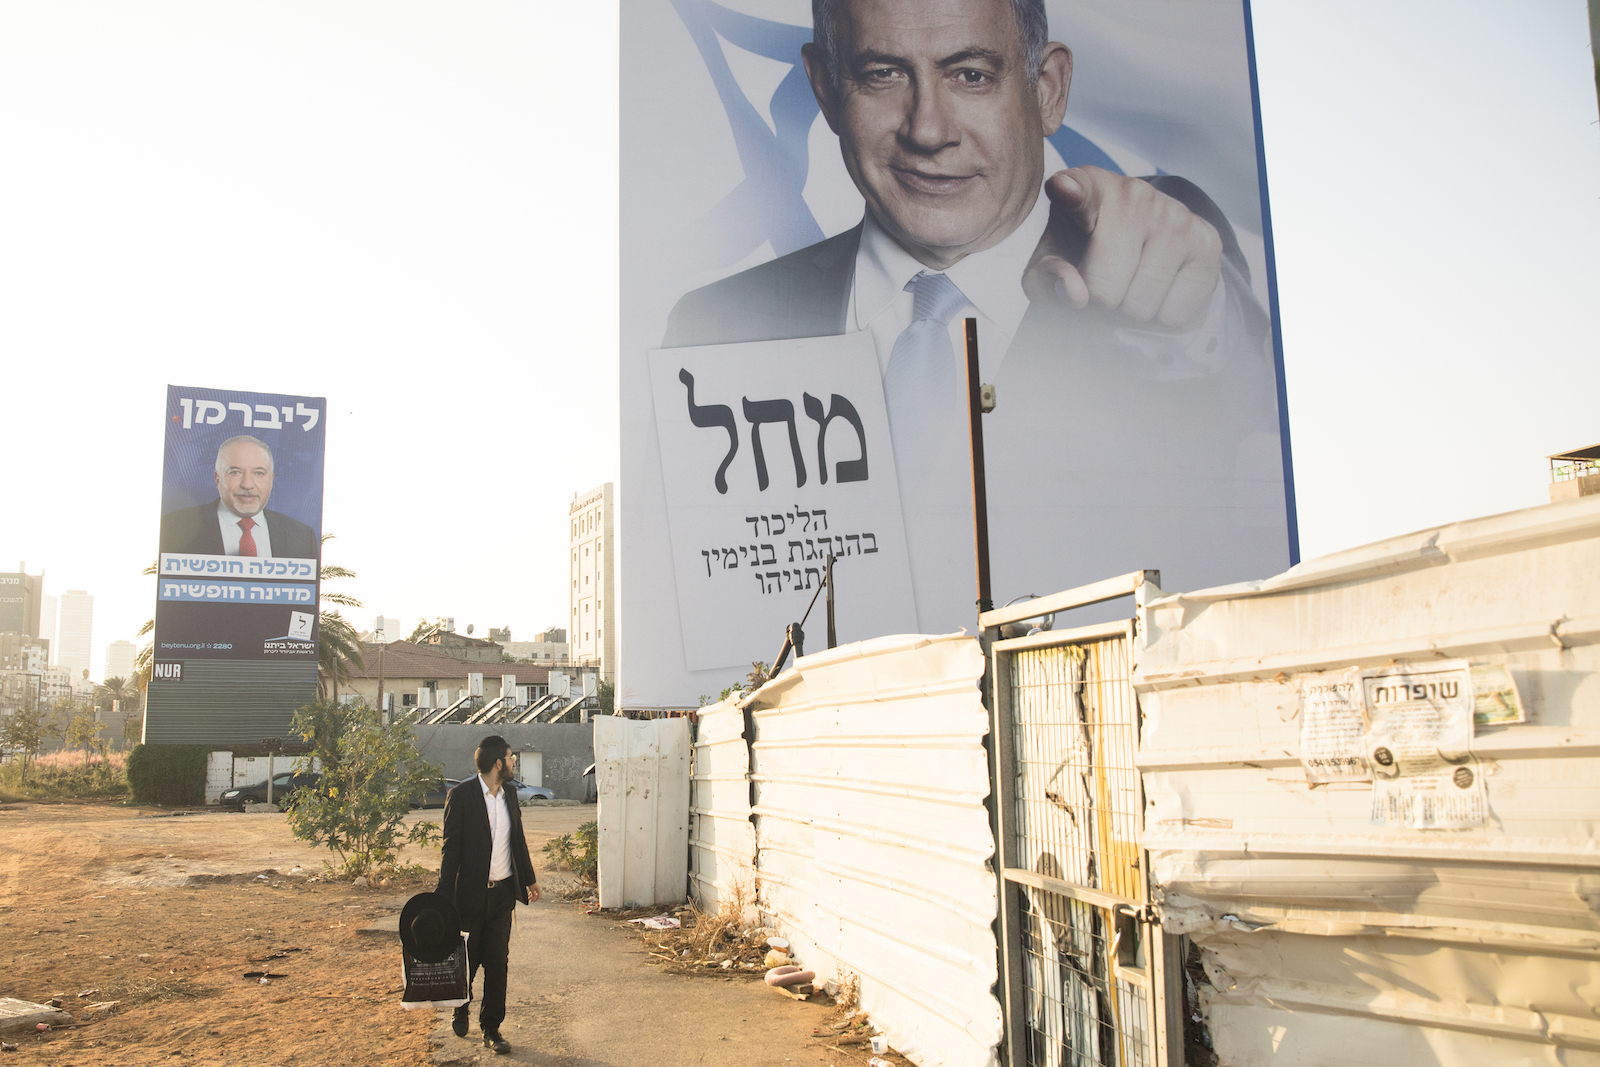 A man walking under a giant billboard, which shows another man pointing at the viewer